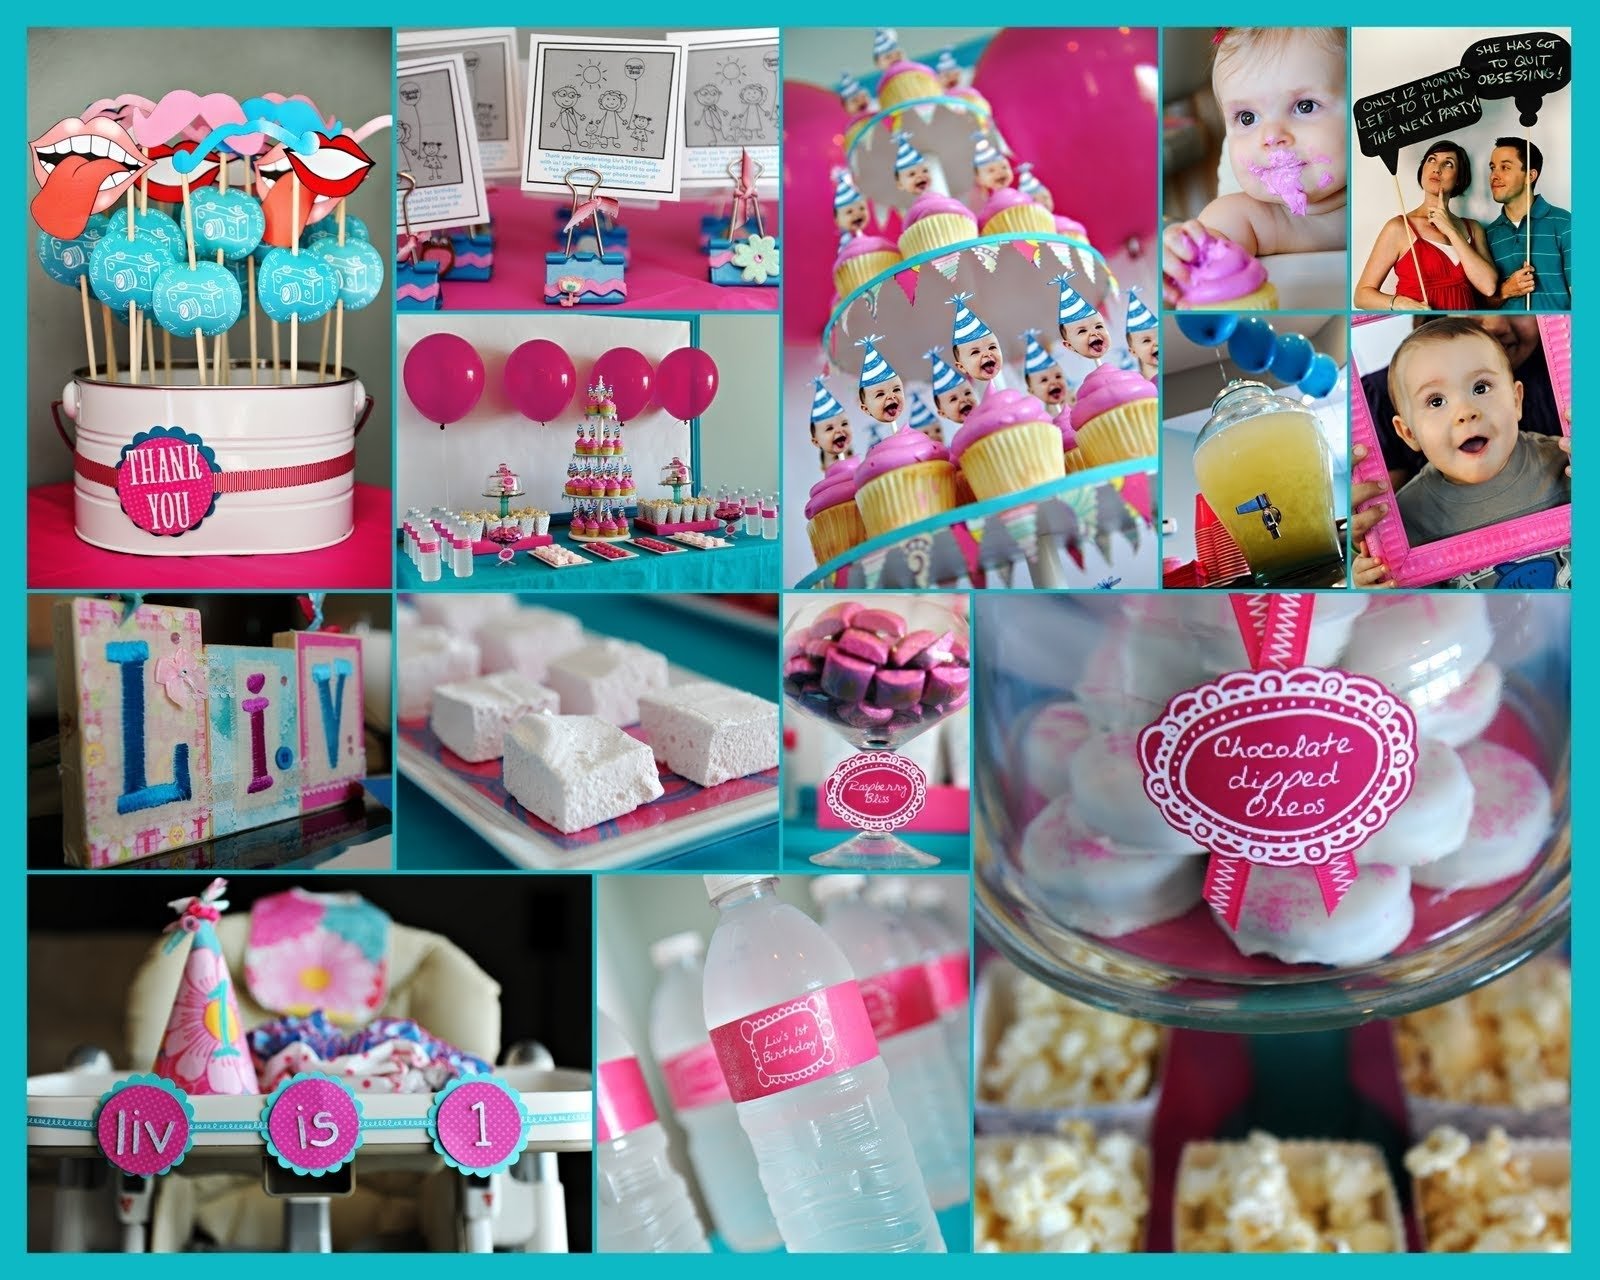 10 Unique Ideas For A Birthday Party first birthday party ideas 1st birthday party ideas kids 20 2022